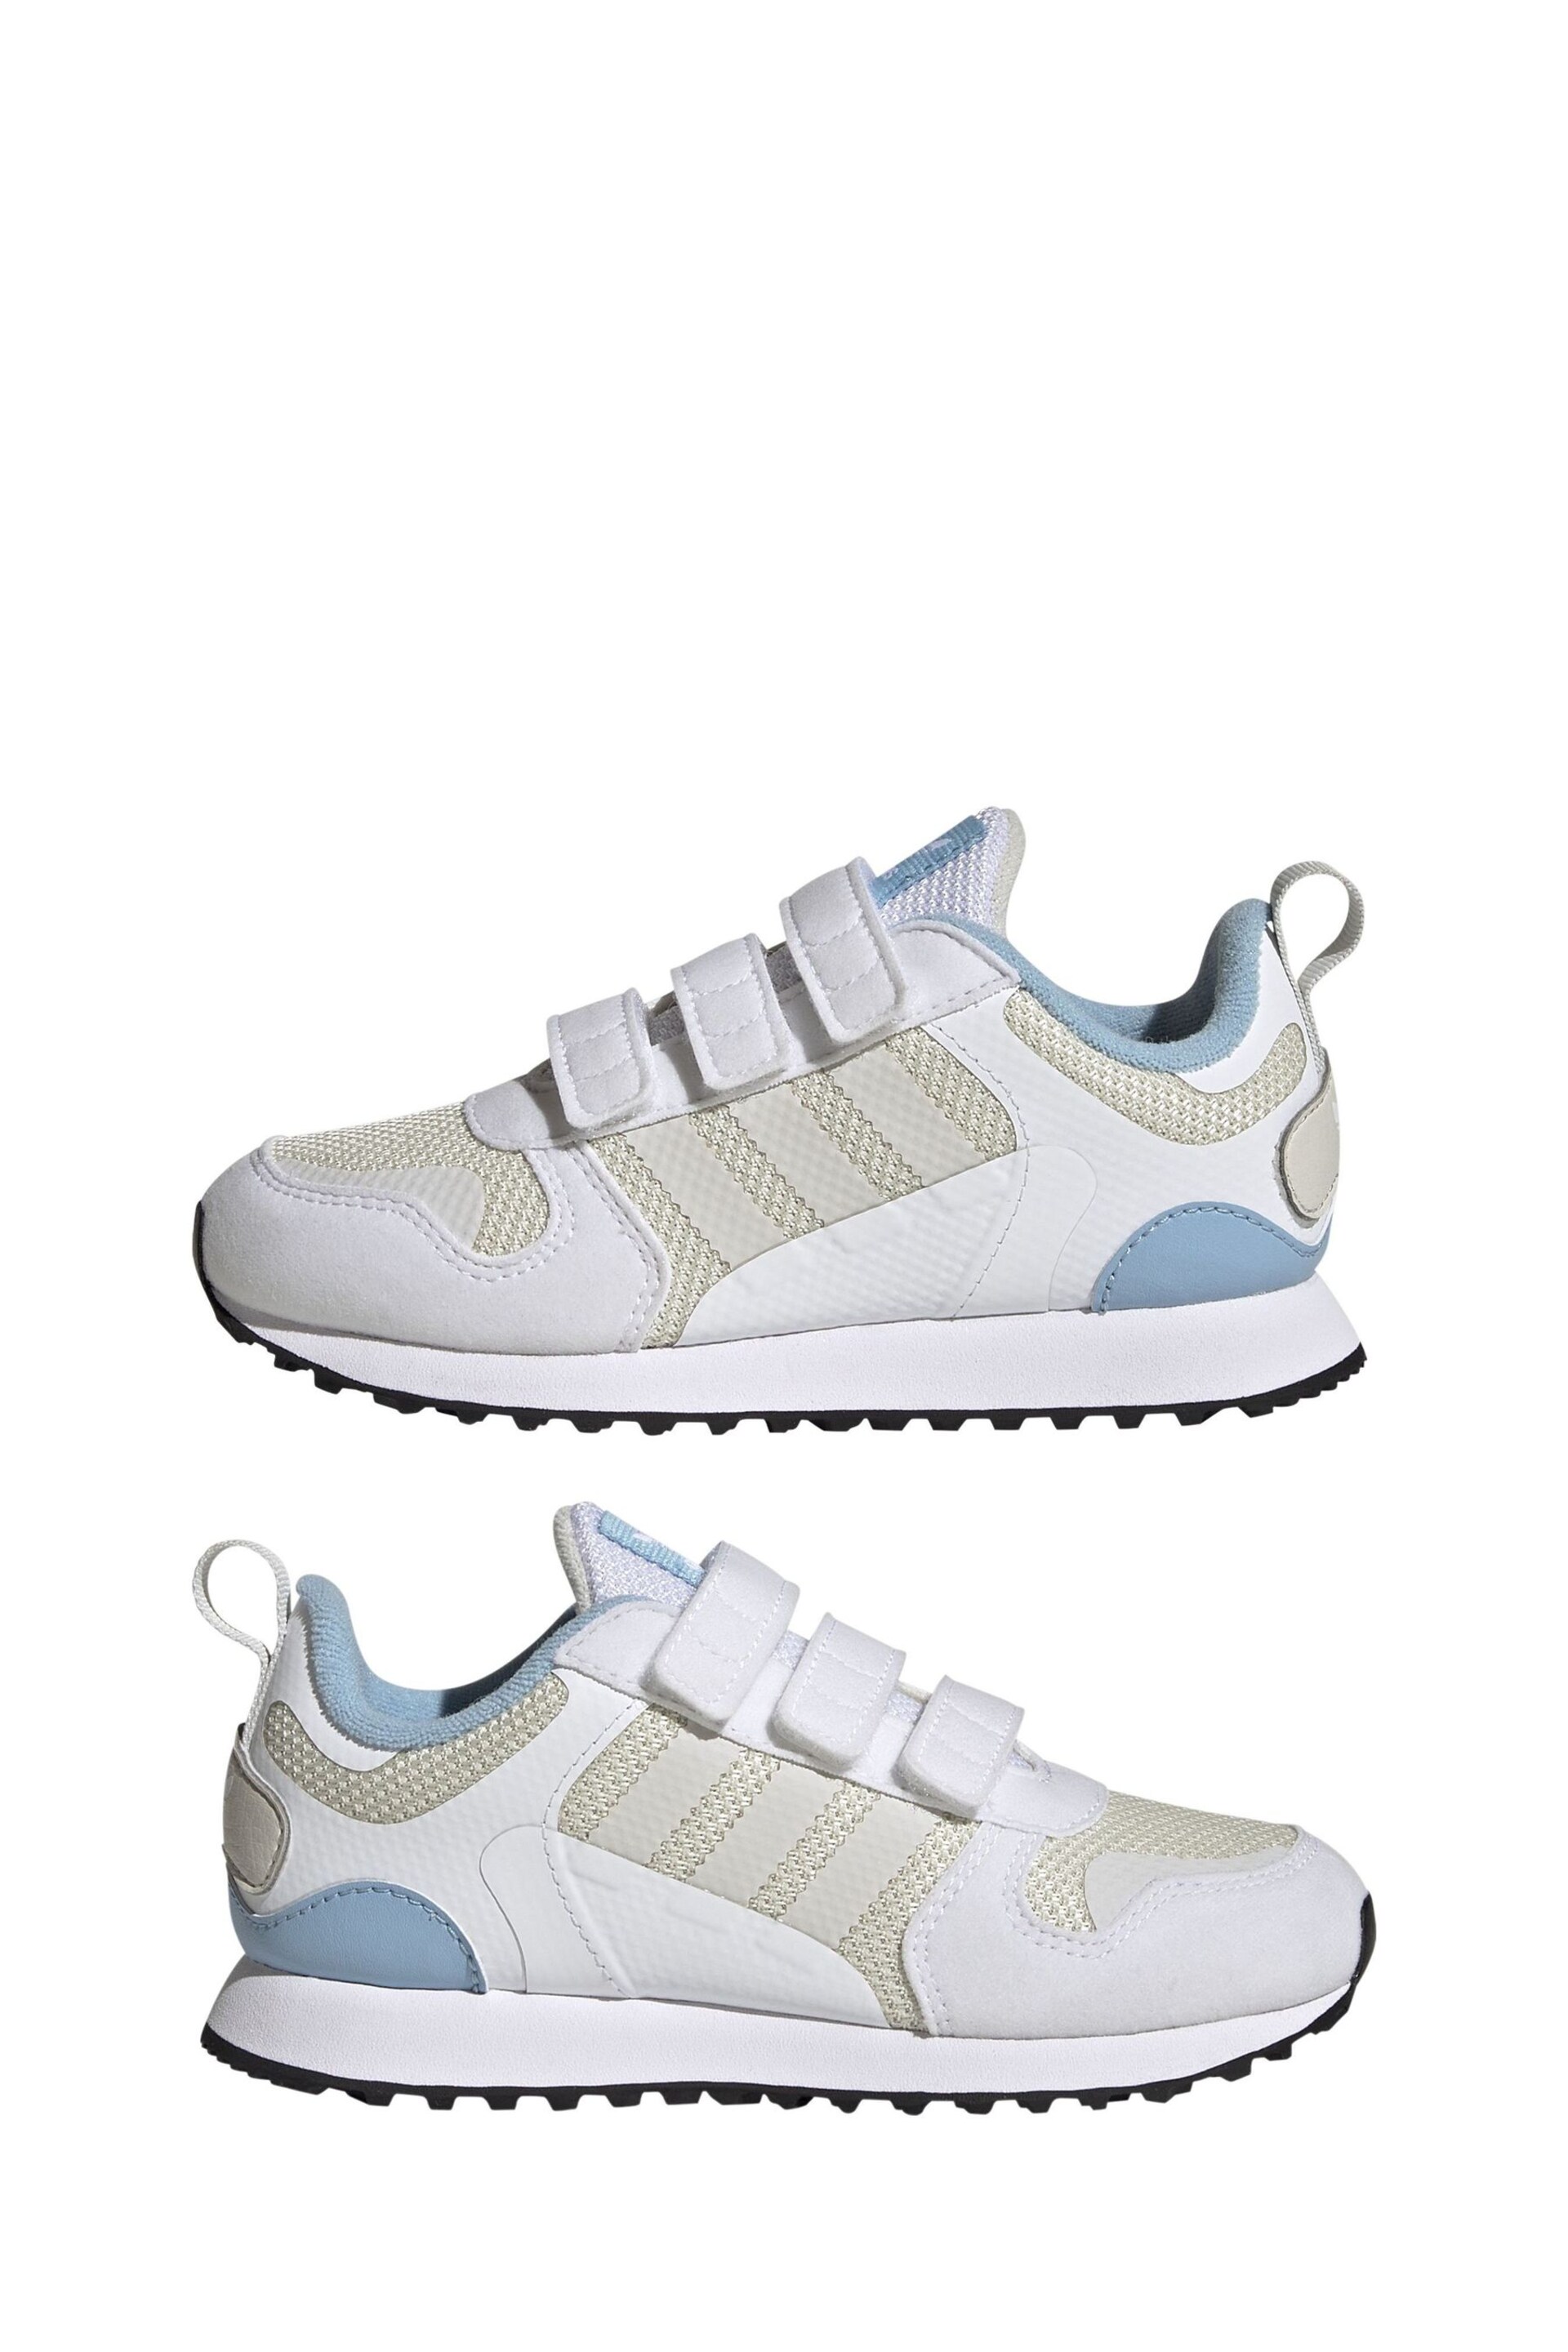 adidas Originals Kids ZX 700 HD White Trainers - Image 5 of 9